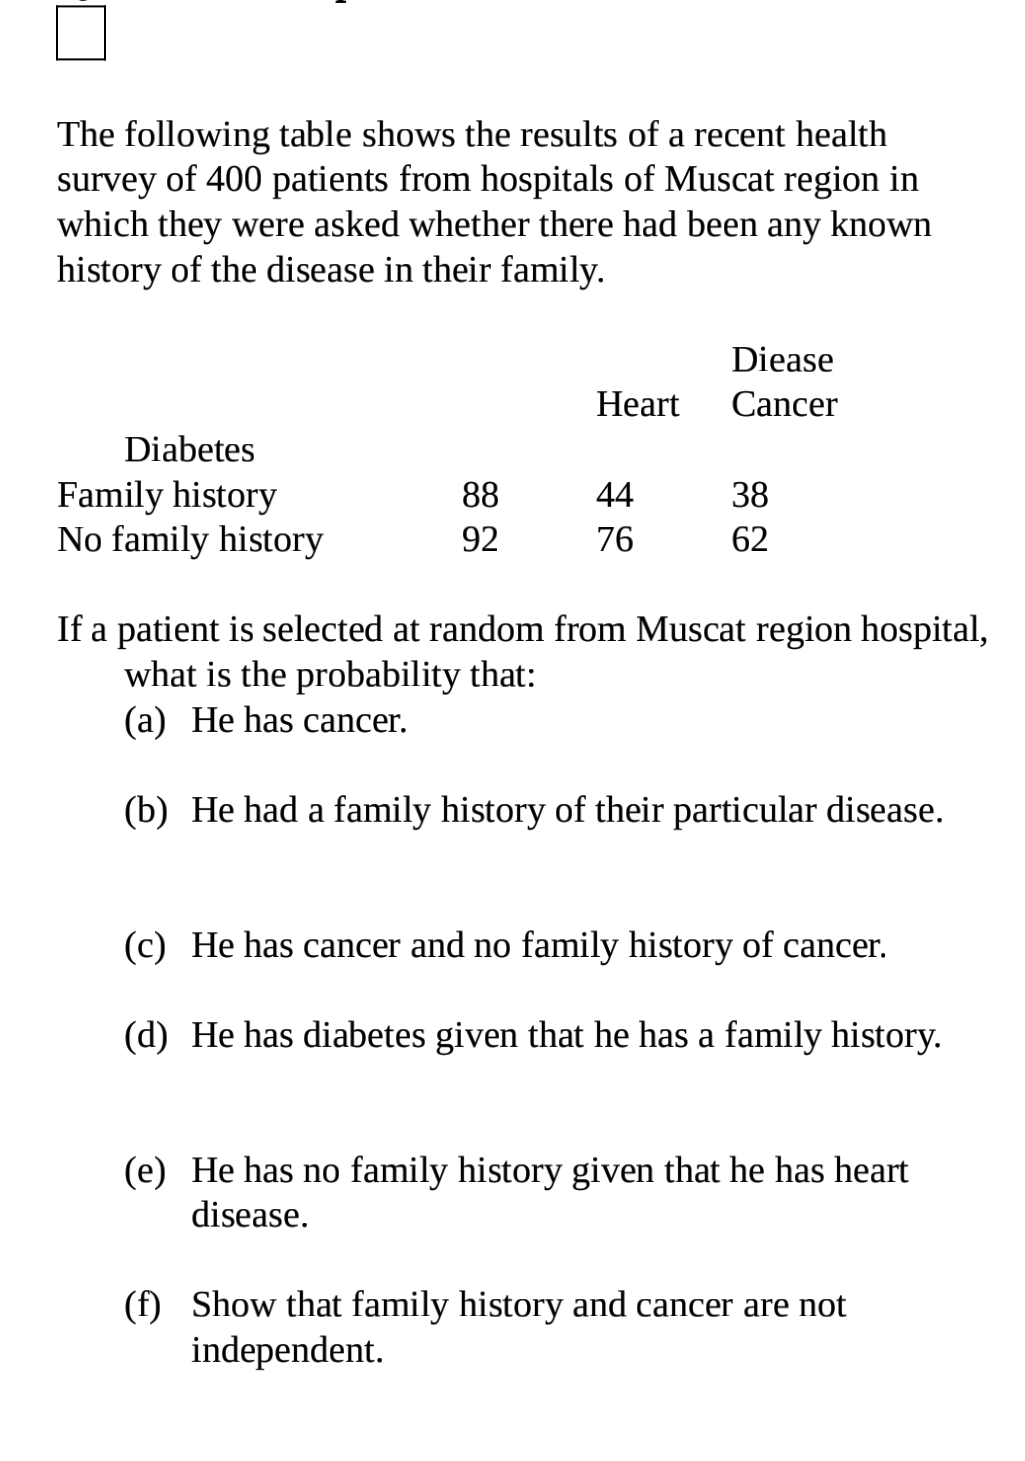 The following table shows the results of a recent health
survey of 400 patients from hospitals of Muscat region in
which they were asked whether there had been any known
history of the disease in their family.
Diease
Нeart
Cancer
Diabetes
Family history
No family history
88
44
38
92
76
62
If a patient is selected at random from Muscat region hospital,
what is the probability that:
(a) He has cancer.
(b) He had a family history of their particular disease.
(c) He has cancer and no family history of cancer.
(d) He has diabetes given that he has a family history.
(e) He has no family history given that he has heart
disease.
(f) Show that family history and cancer are not
independent.
